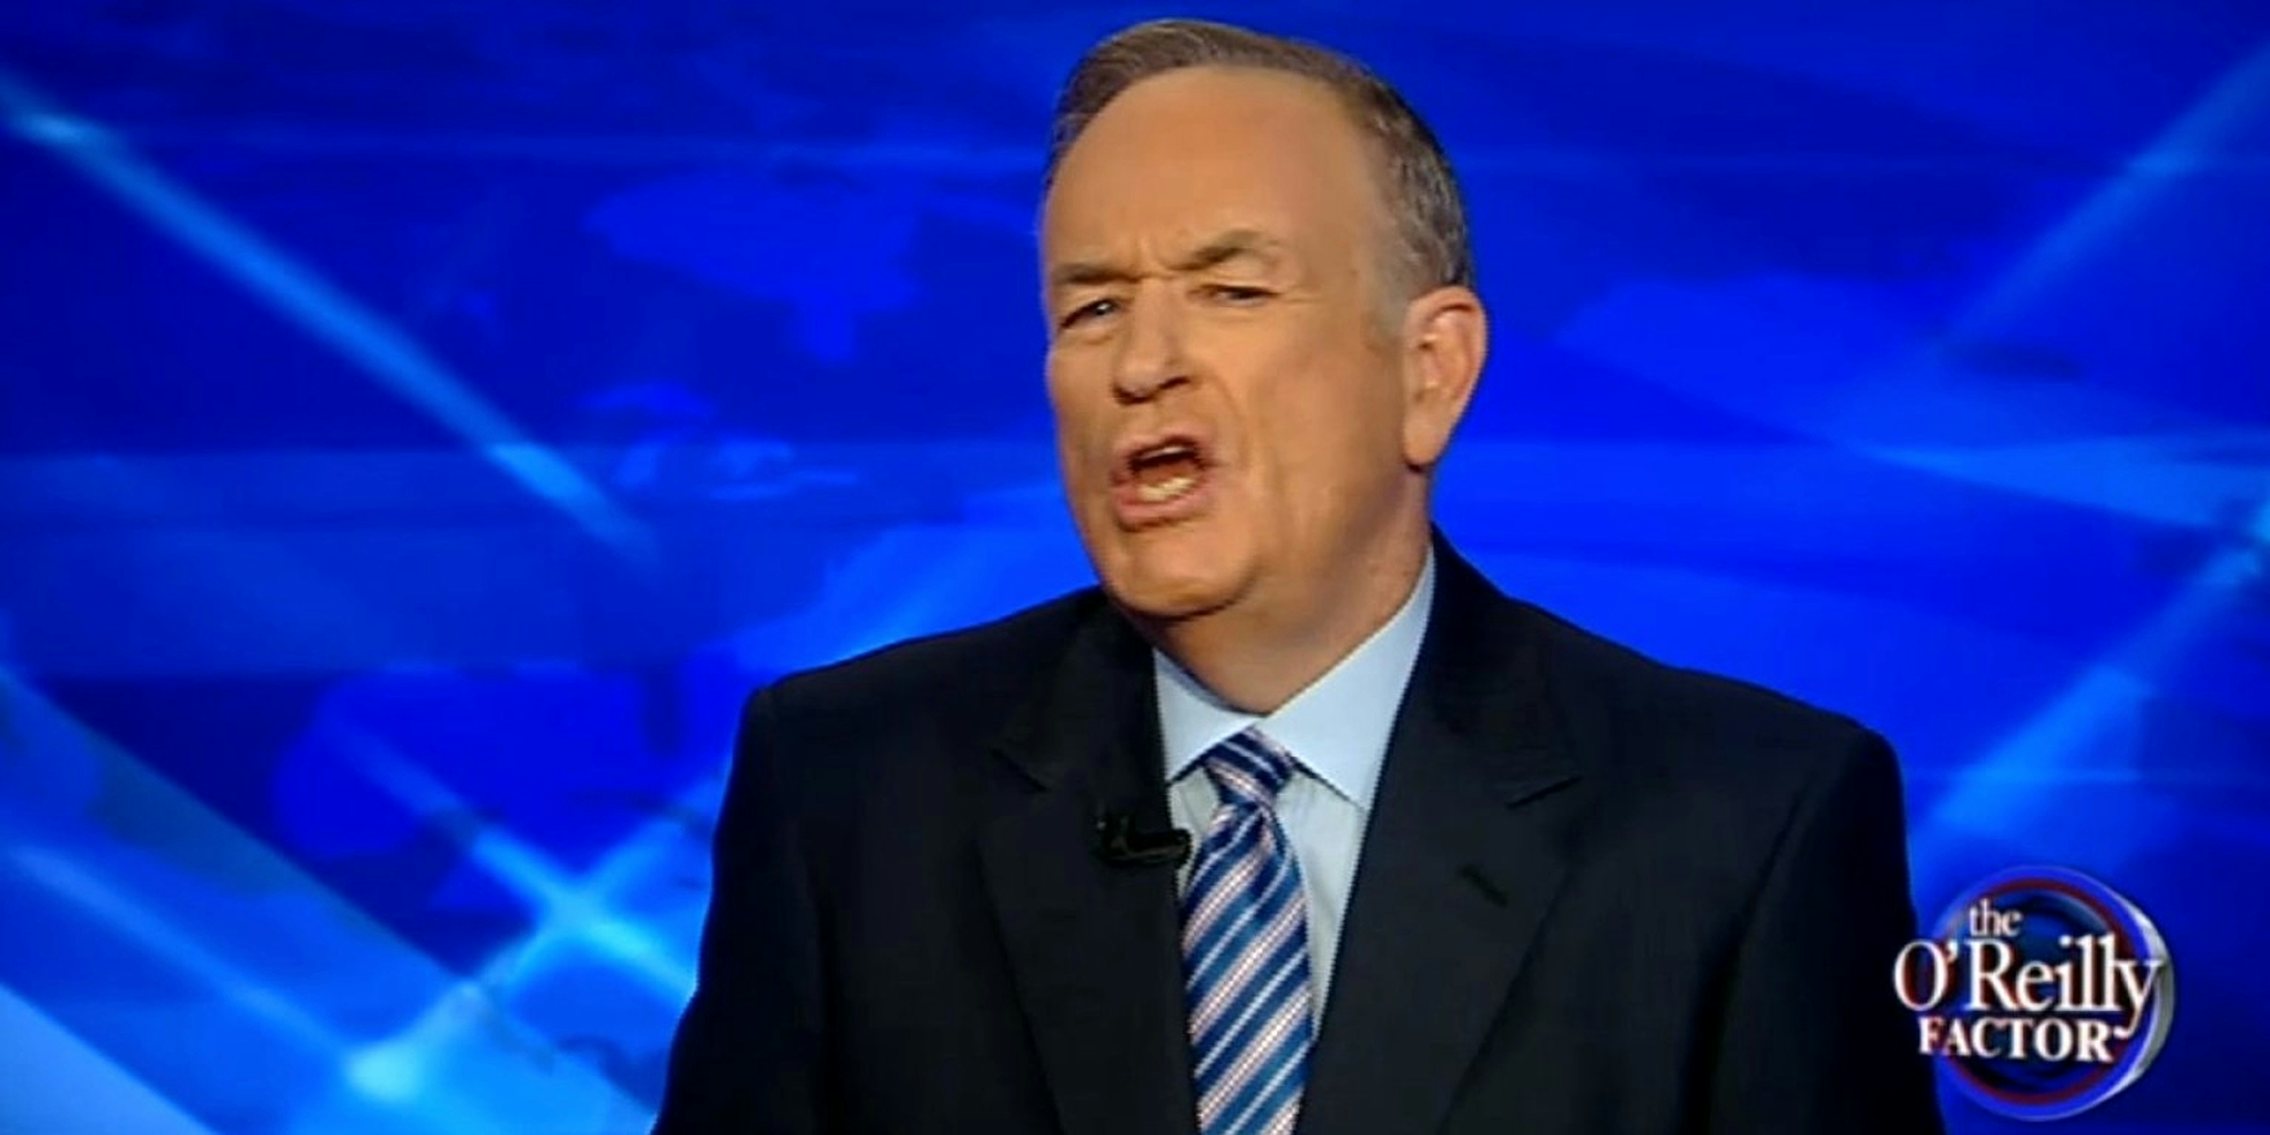 Fox News Host Bill Oreilly Faces New Accusations About Lying The Daily Dot